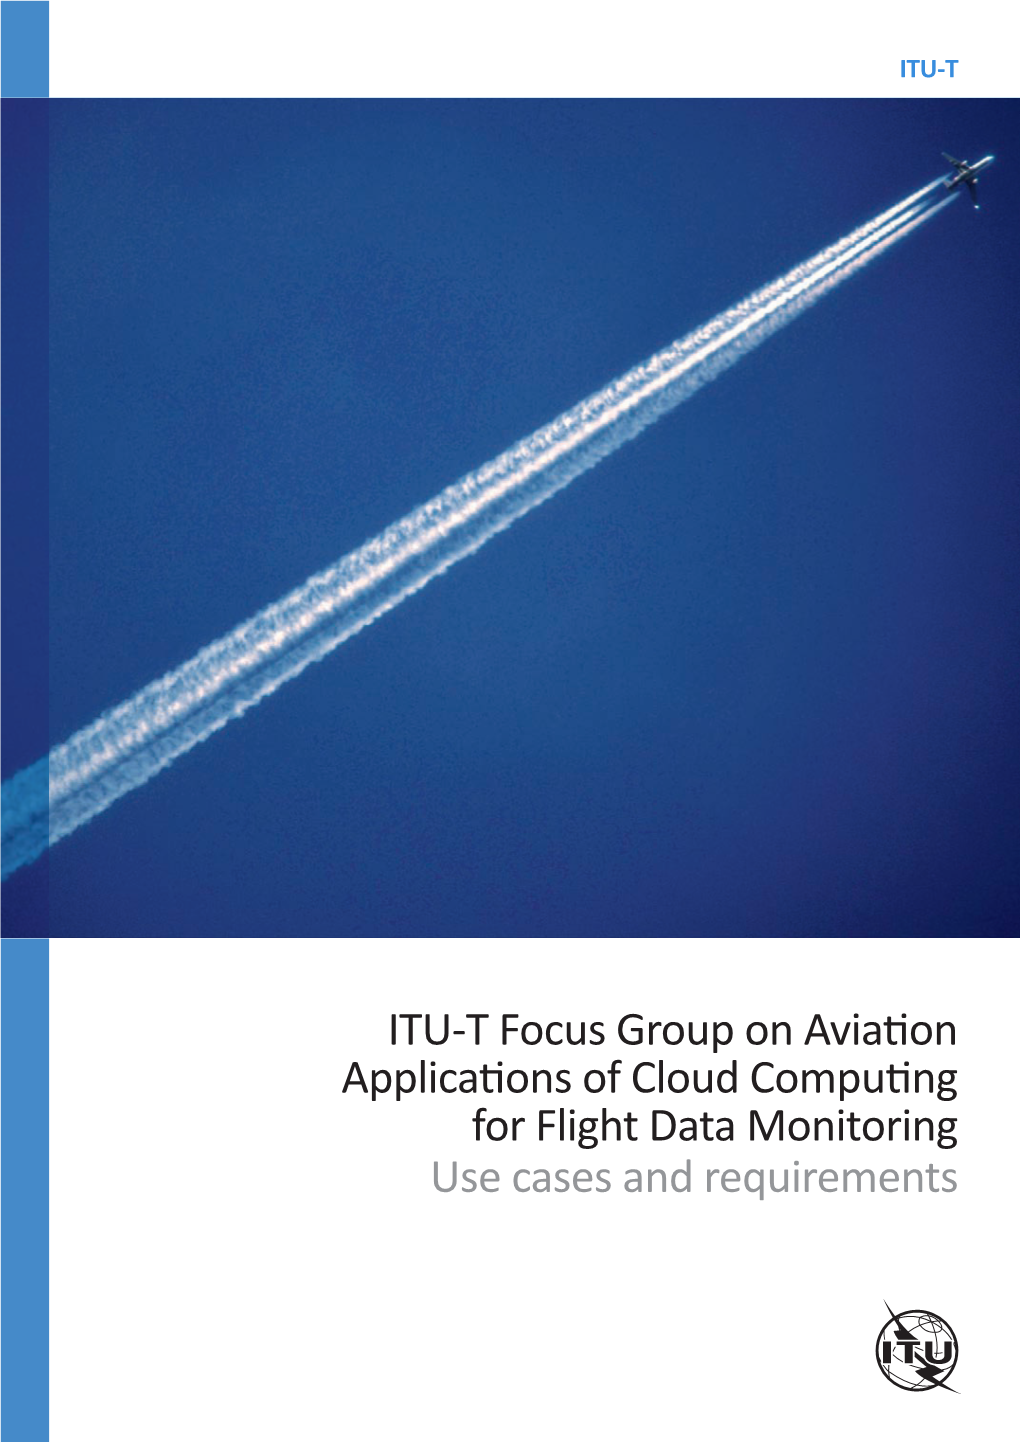 ITU-T Focus Group on Aviation Applications of Cloud Computing for Flight Data Monitoring Use Cases and Requirements April 2016